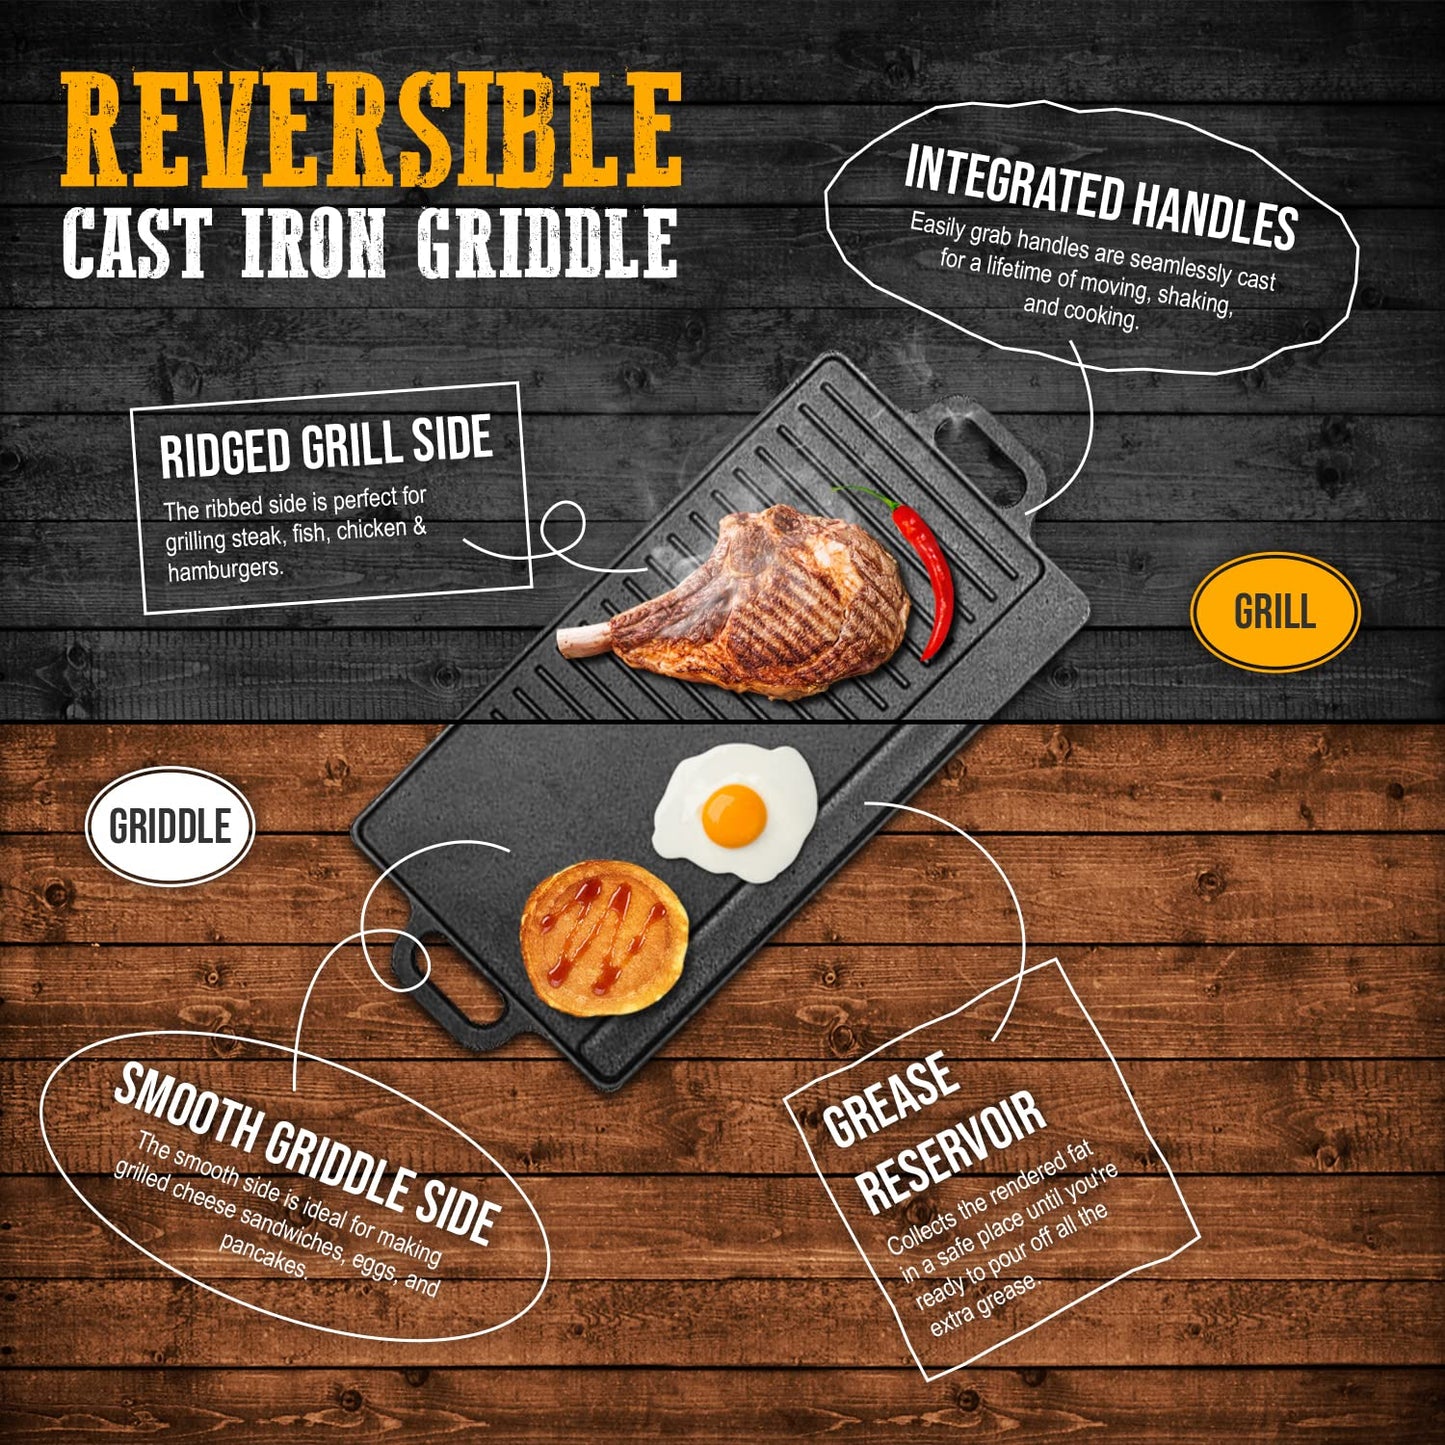 Cast Iron Griddle, Plus Cast Iron Grill Press & Pan Scrapers - Reversible Grill/Griddle for Stove top, Gas, Preseasoned & Non-Stick, measure 17 x 9 inch,